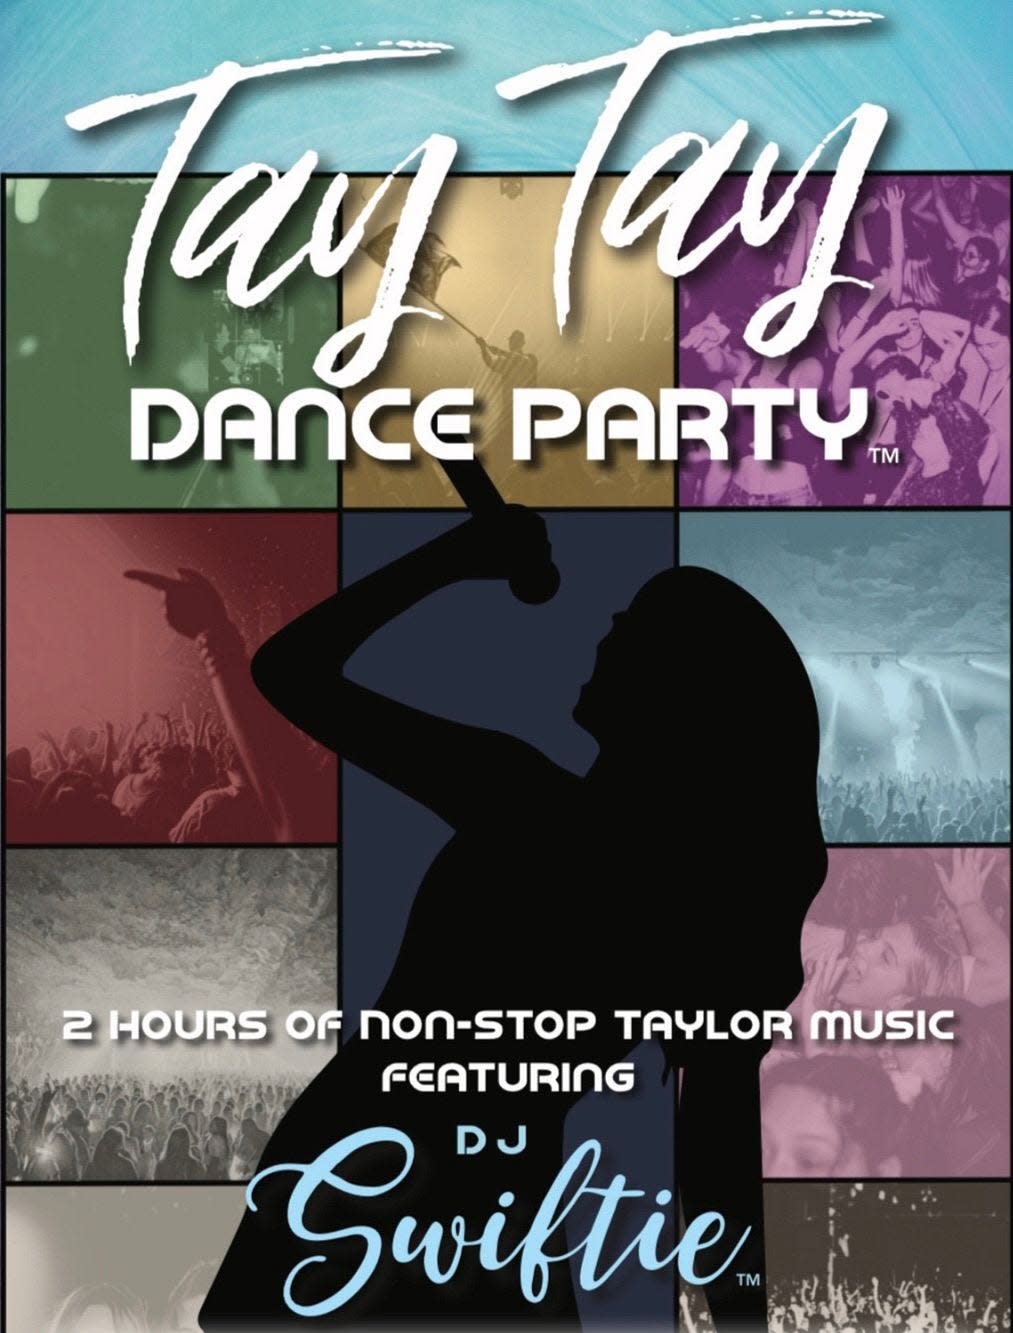 From 8 p.m. to 1 a.m., at Gabe's, dance along to all of Taylor Swift's greatest hits in preparation for her upcoming release, "The Tortured Poets Department."